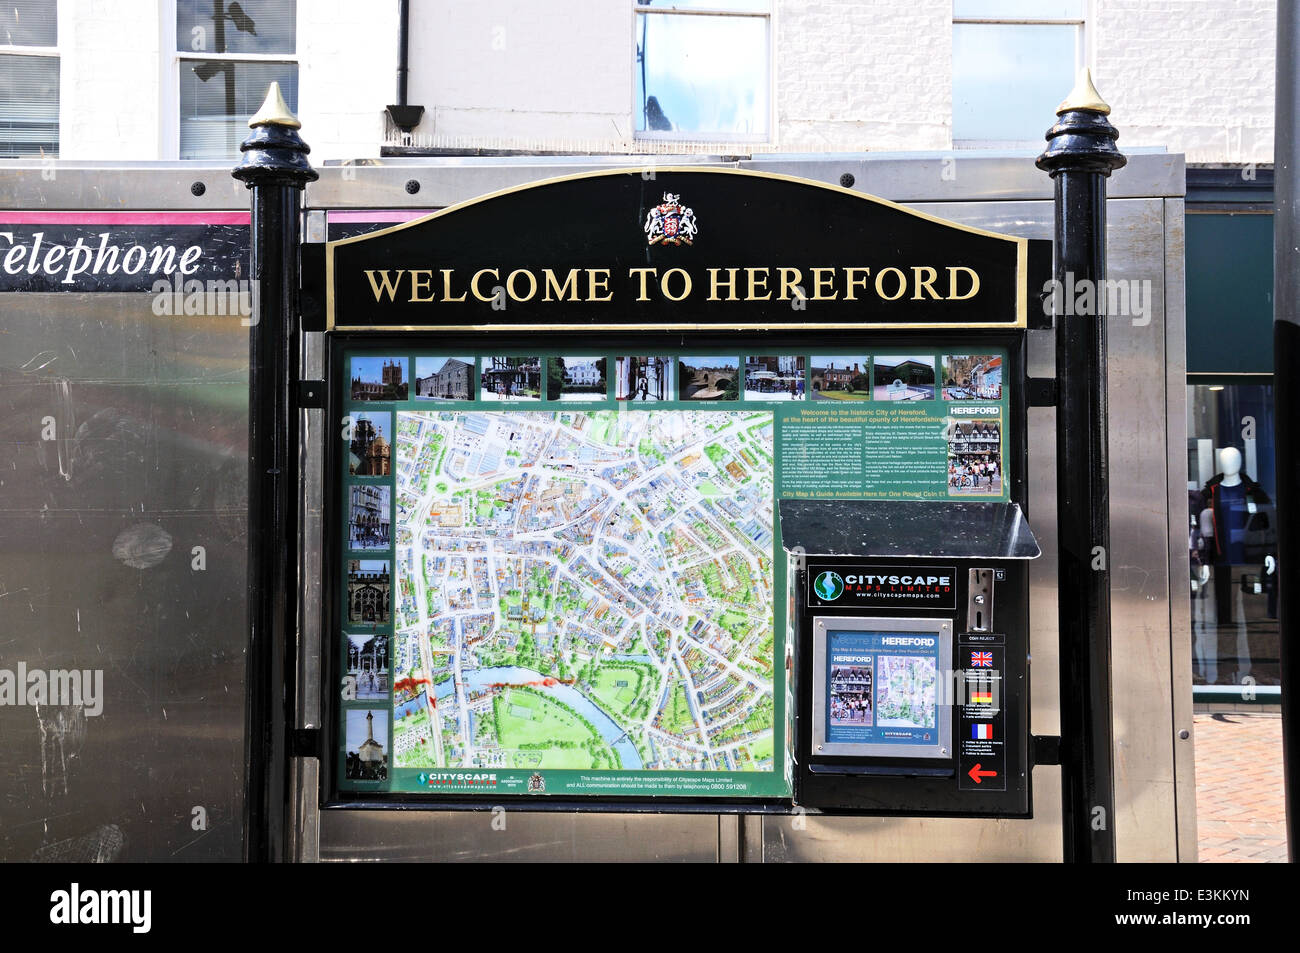 Welcome to Hereford sign and map with map dispenser, Hereford, Herefordshire, England, UK, Western Europe. Stock Photo